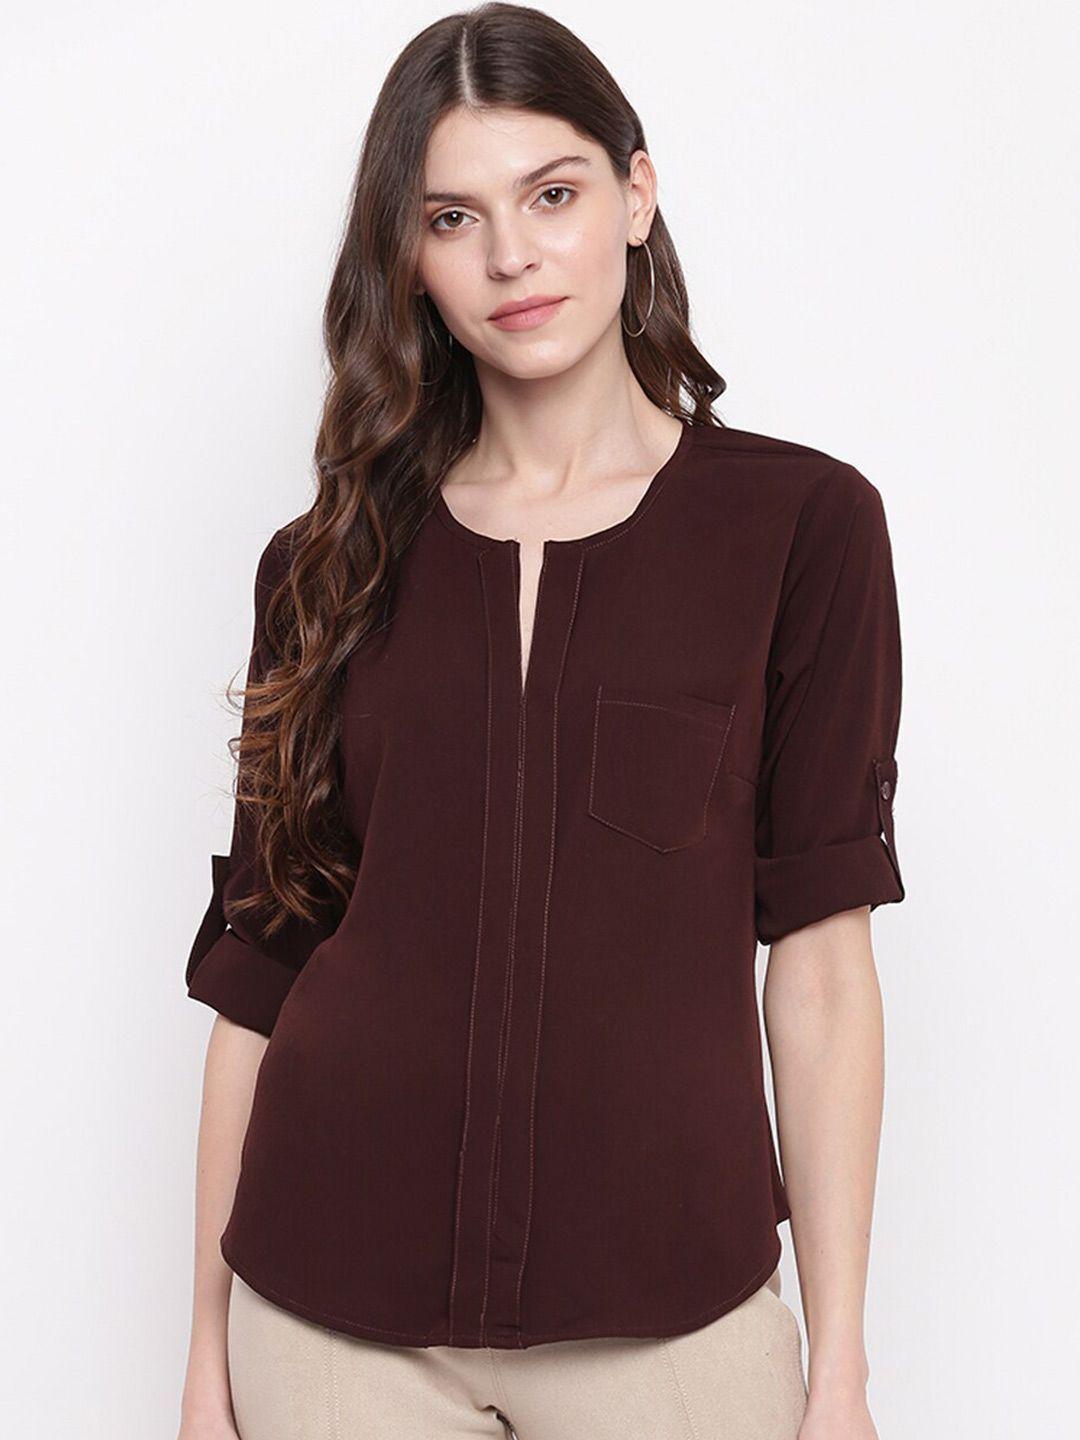 dressberry coffee brown roll-up sleeves crepe shirt style top